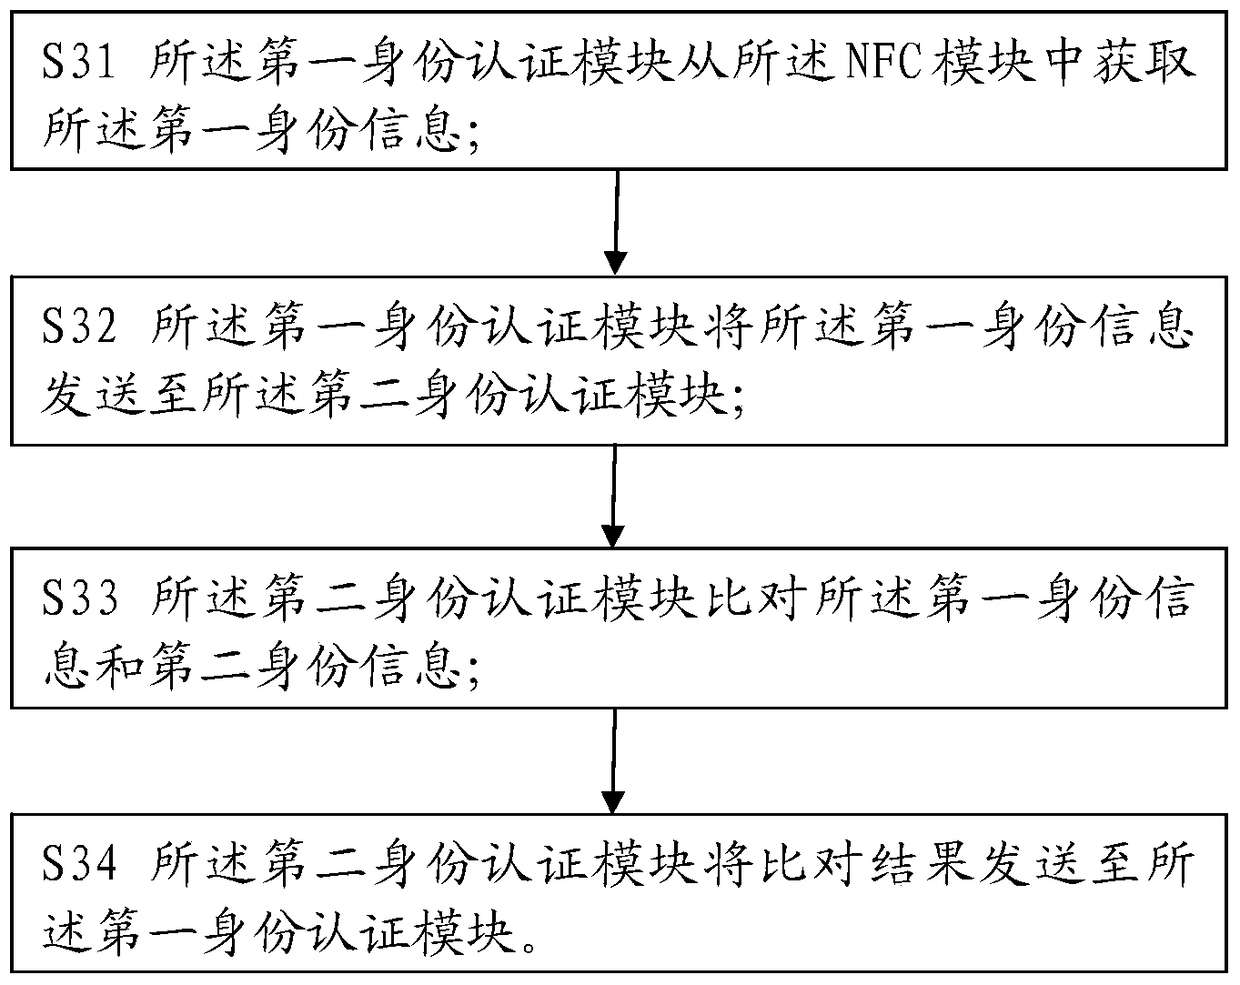 An NFC-based dynamic password identity authentication method and system